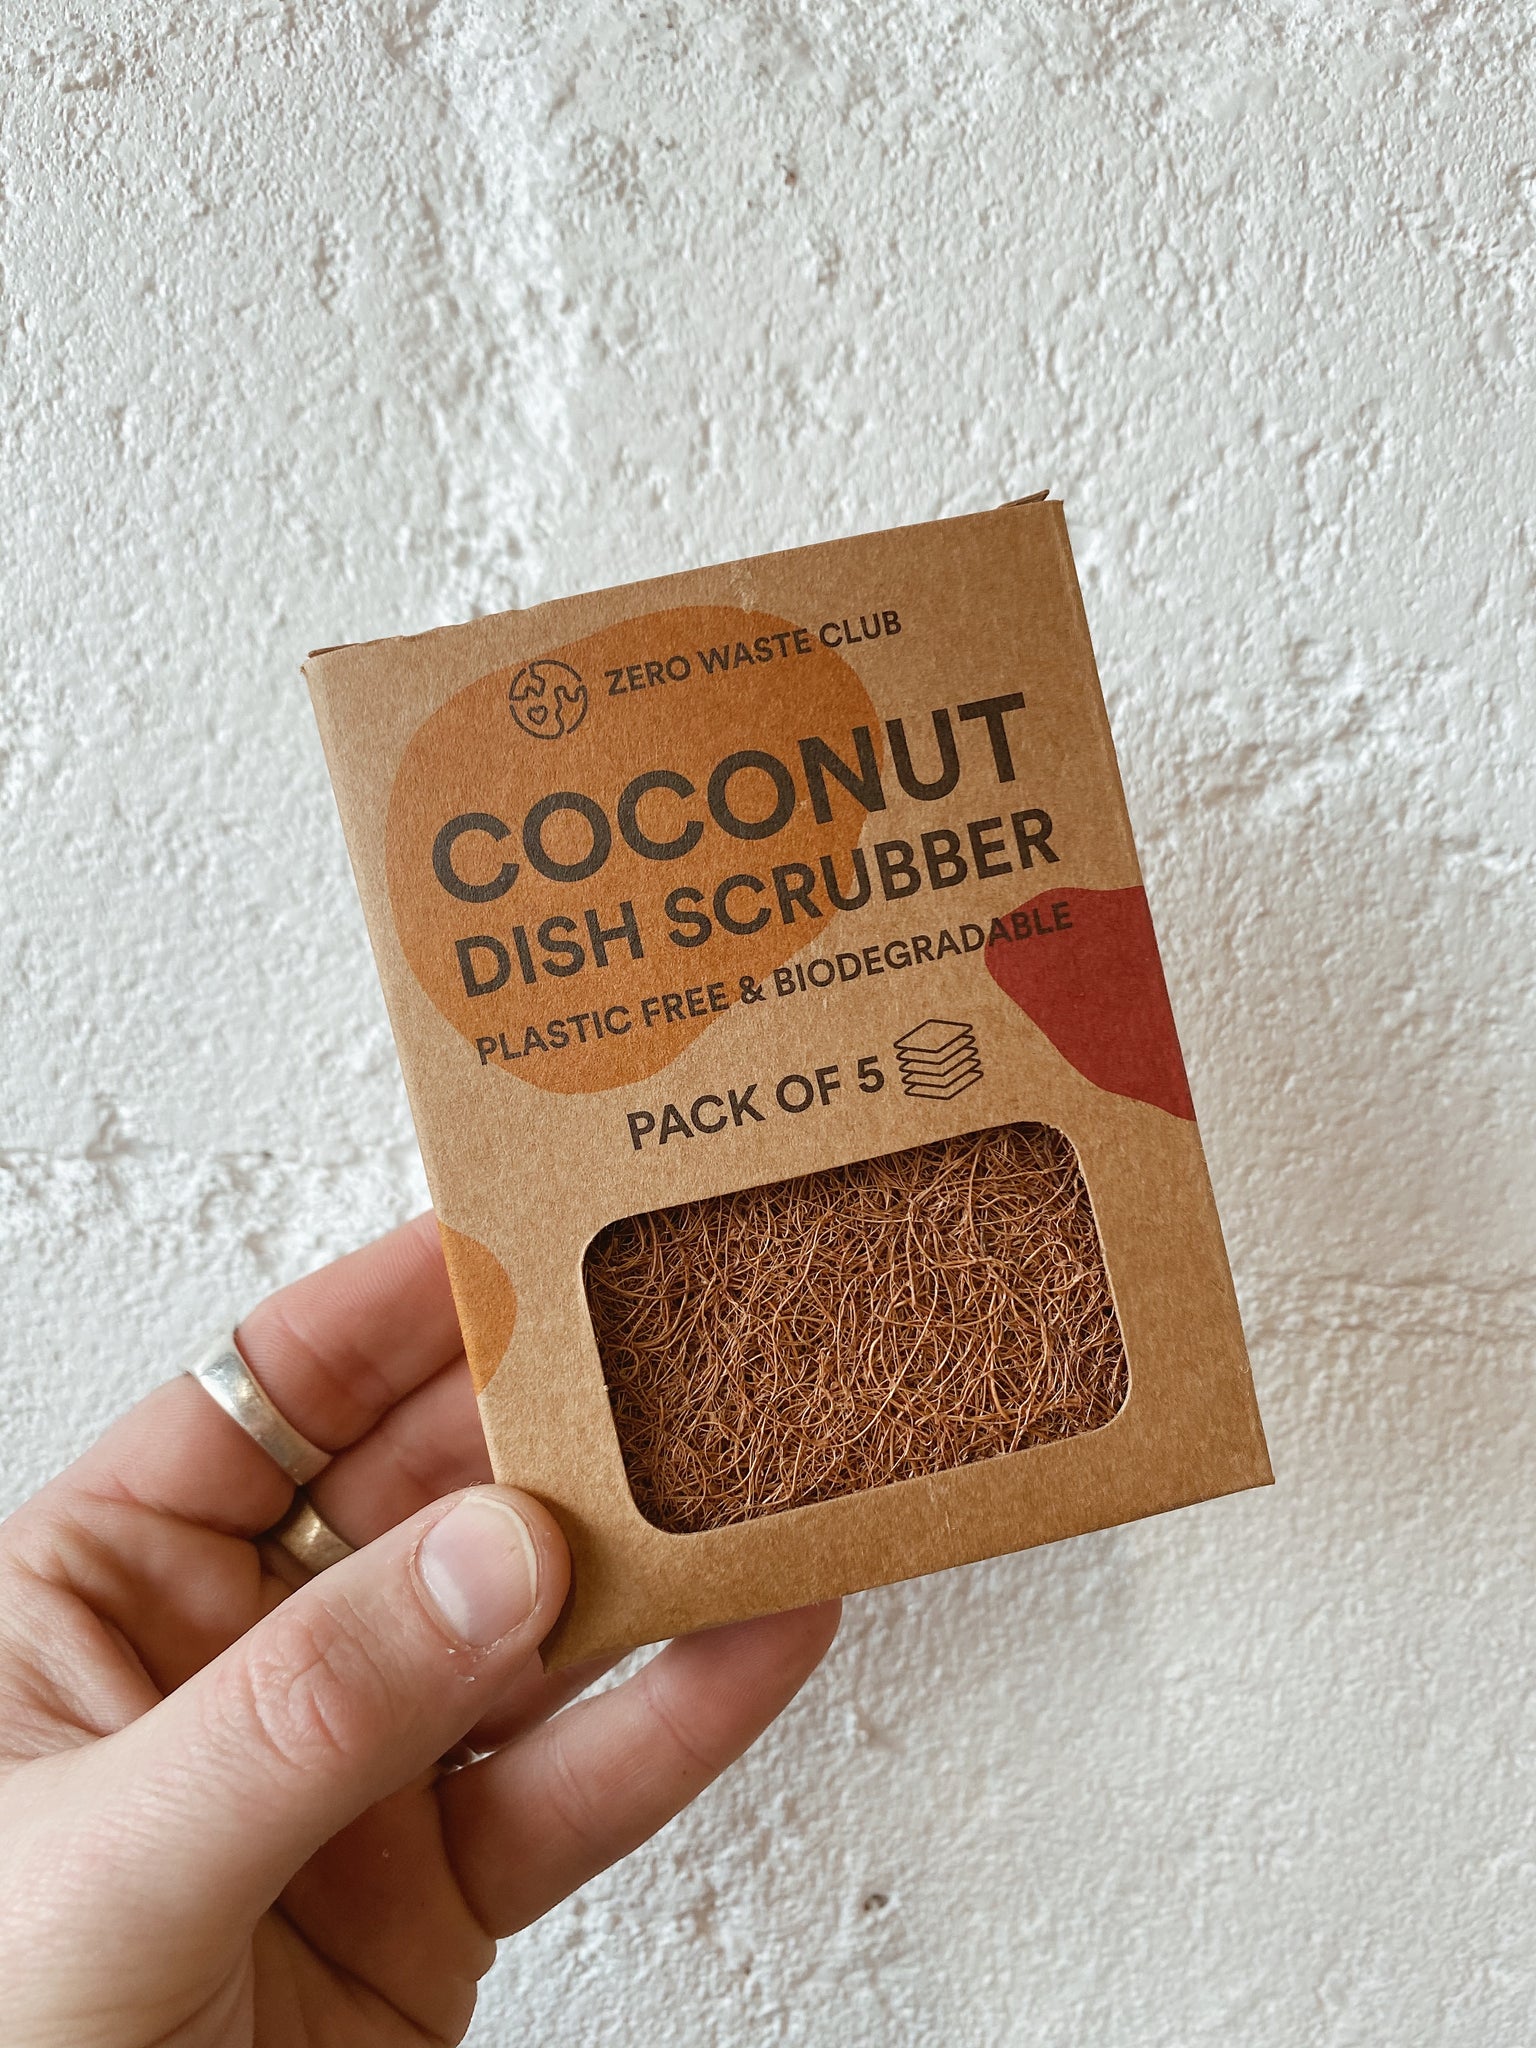 Coconut Dish Scrubber Pack of 5